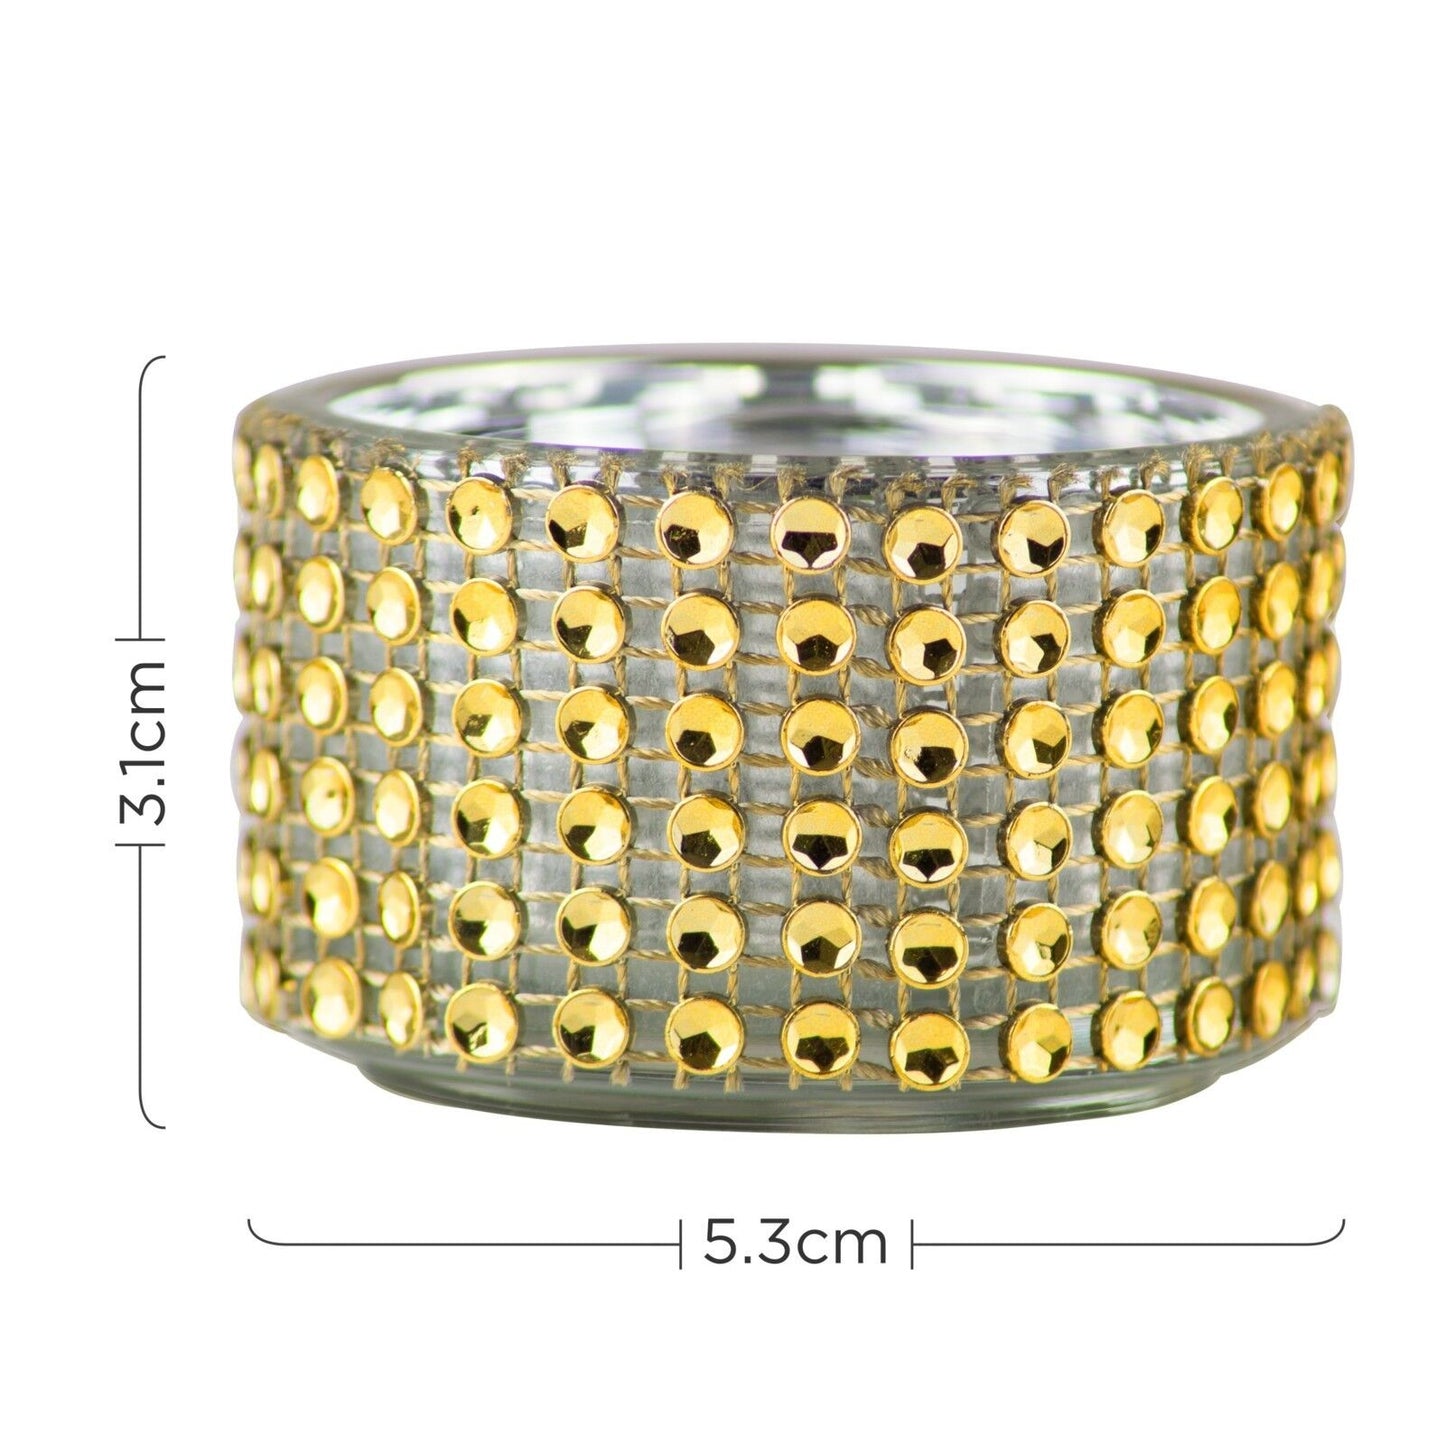 Pack of 4 - Decorative Gold Diamante Jewelled Tea light Candle Holders